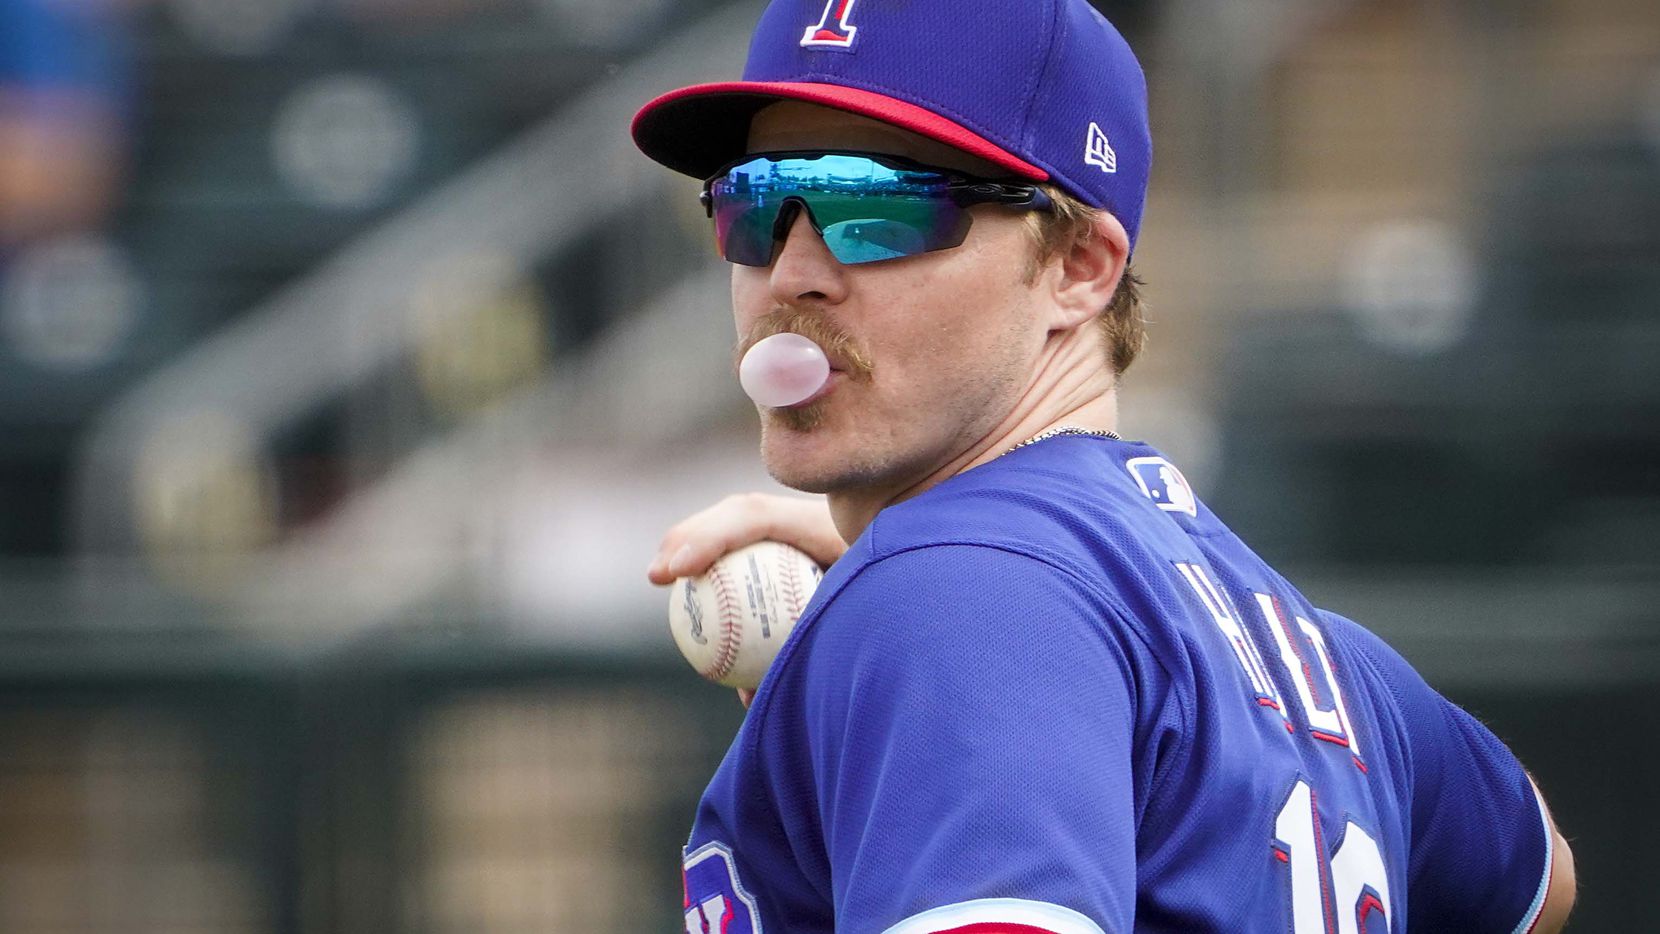 Texas Rangers second baseman Brock Holt blows a bubble as he brings the ball back into the...